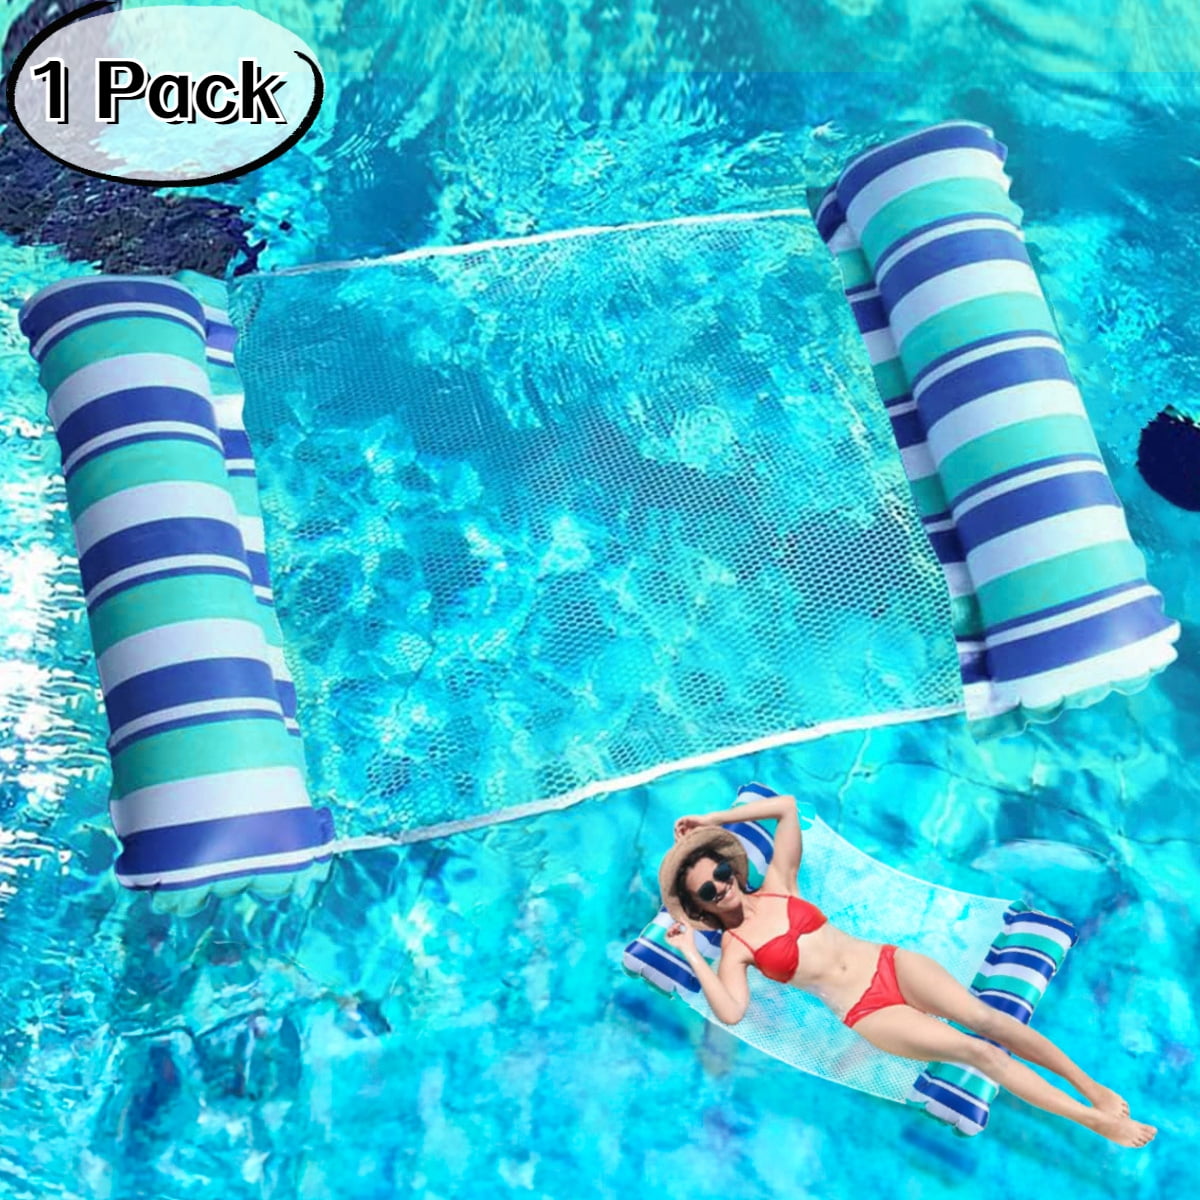 Sevenlady Pool Floats, 4-in-1 Inflatable Water Hammock, Pool Toys for ...